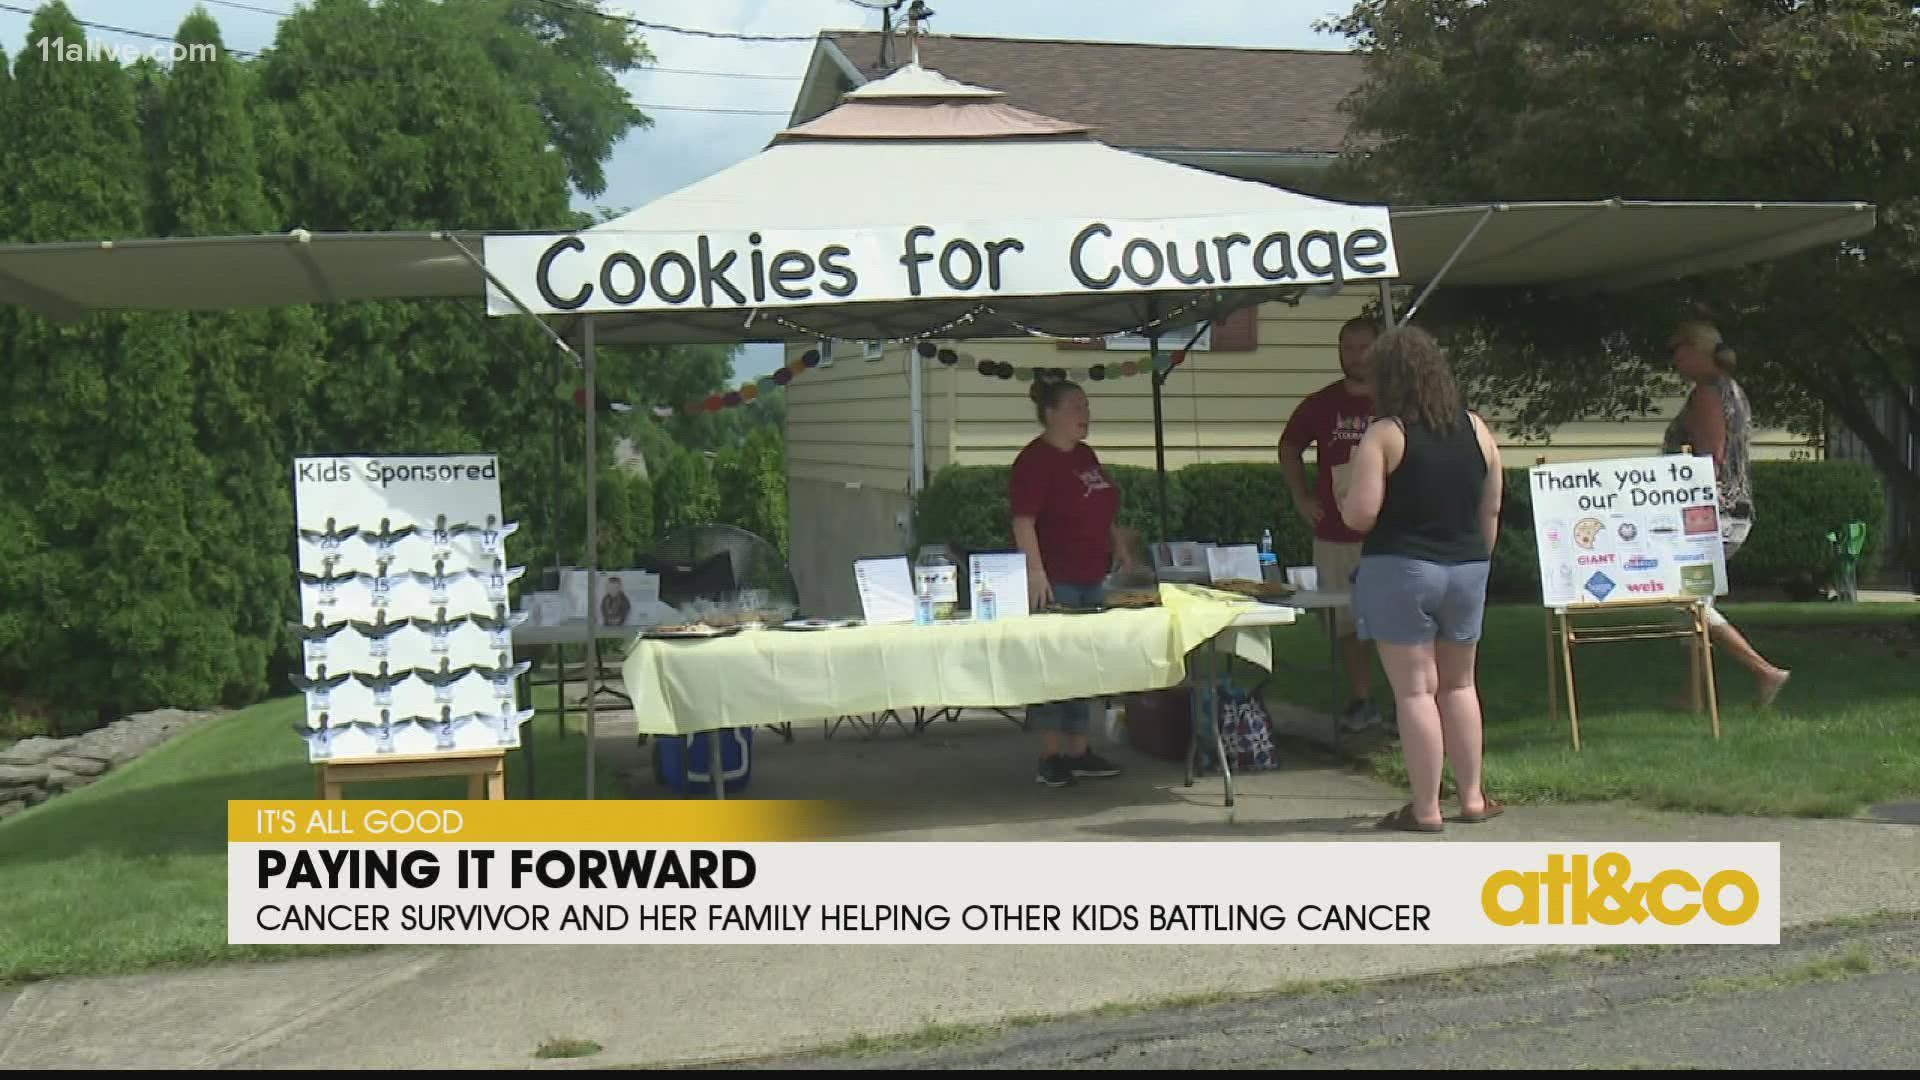 4-year-old Avery beat cancer and is now helping other kids battling the disease by selling cookies and buying beads for courage.